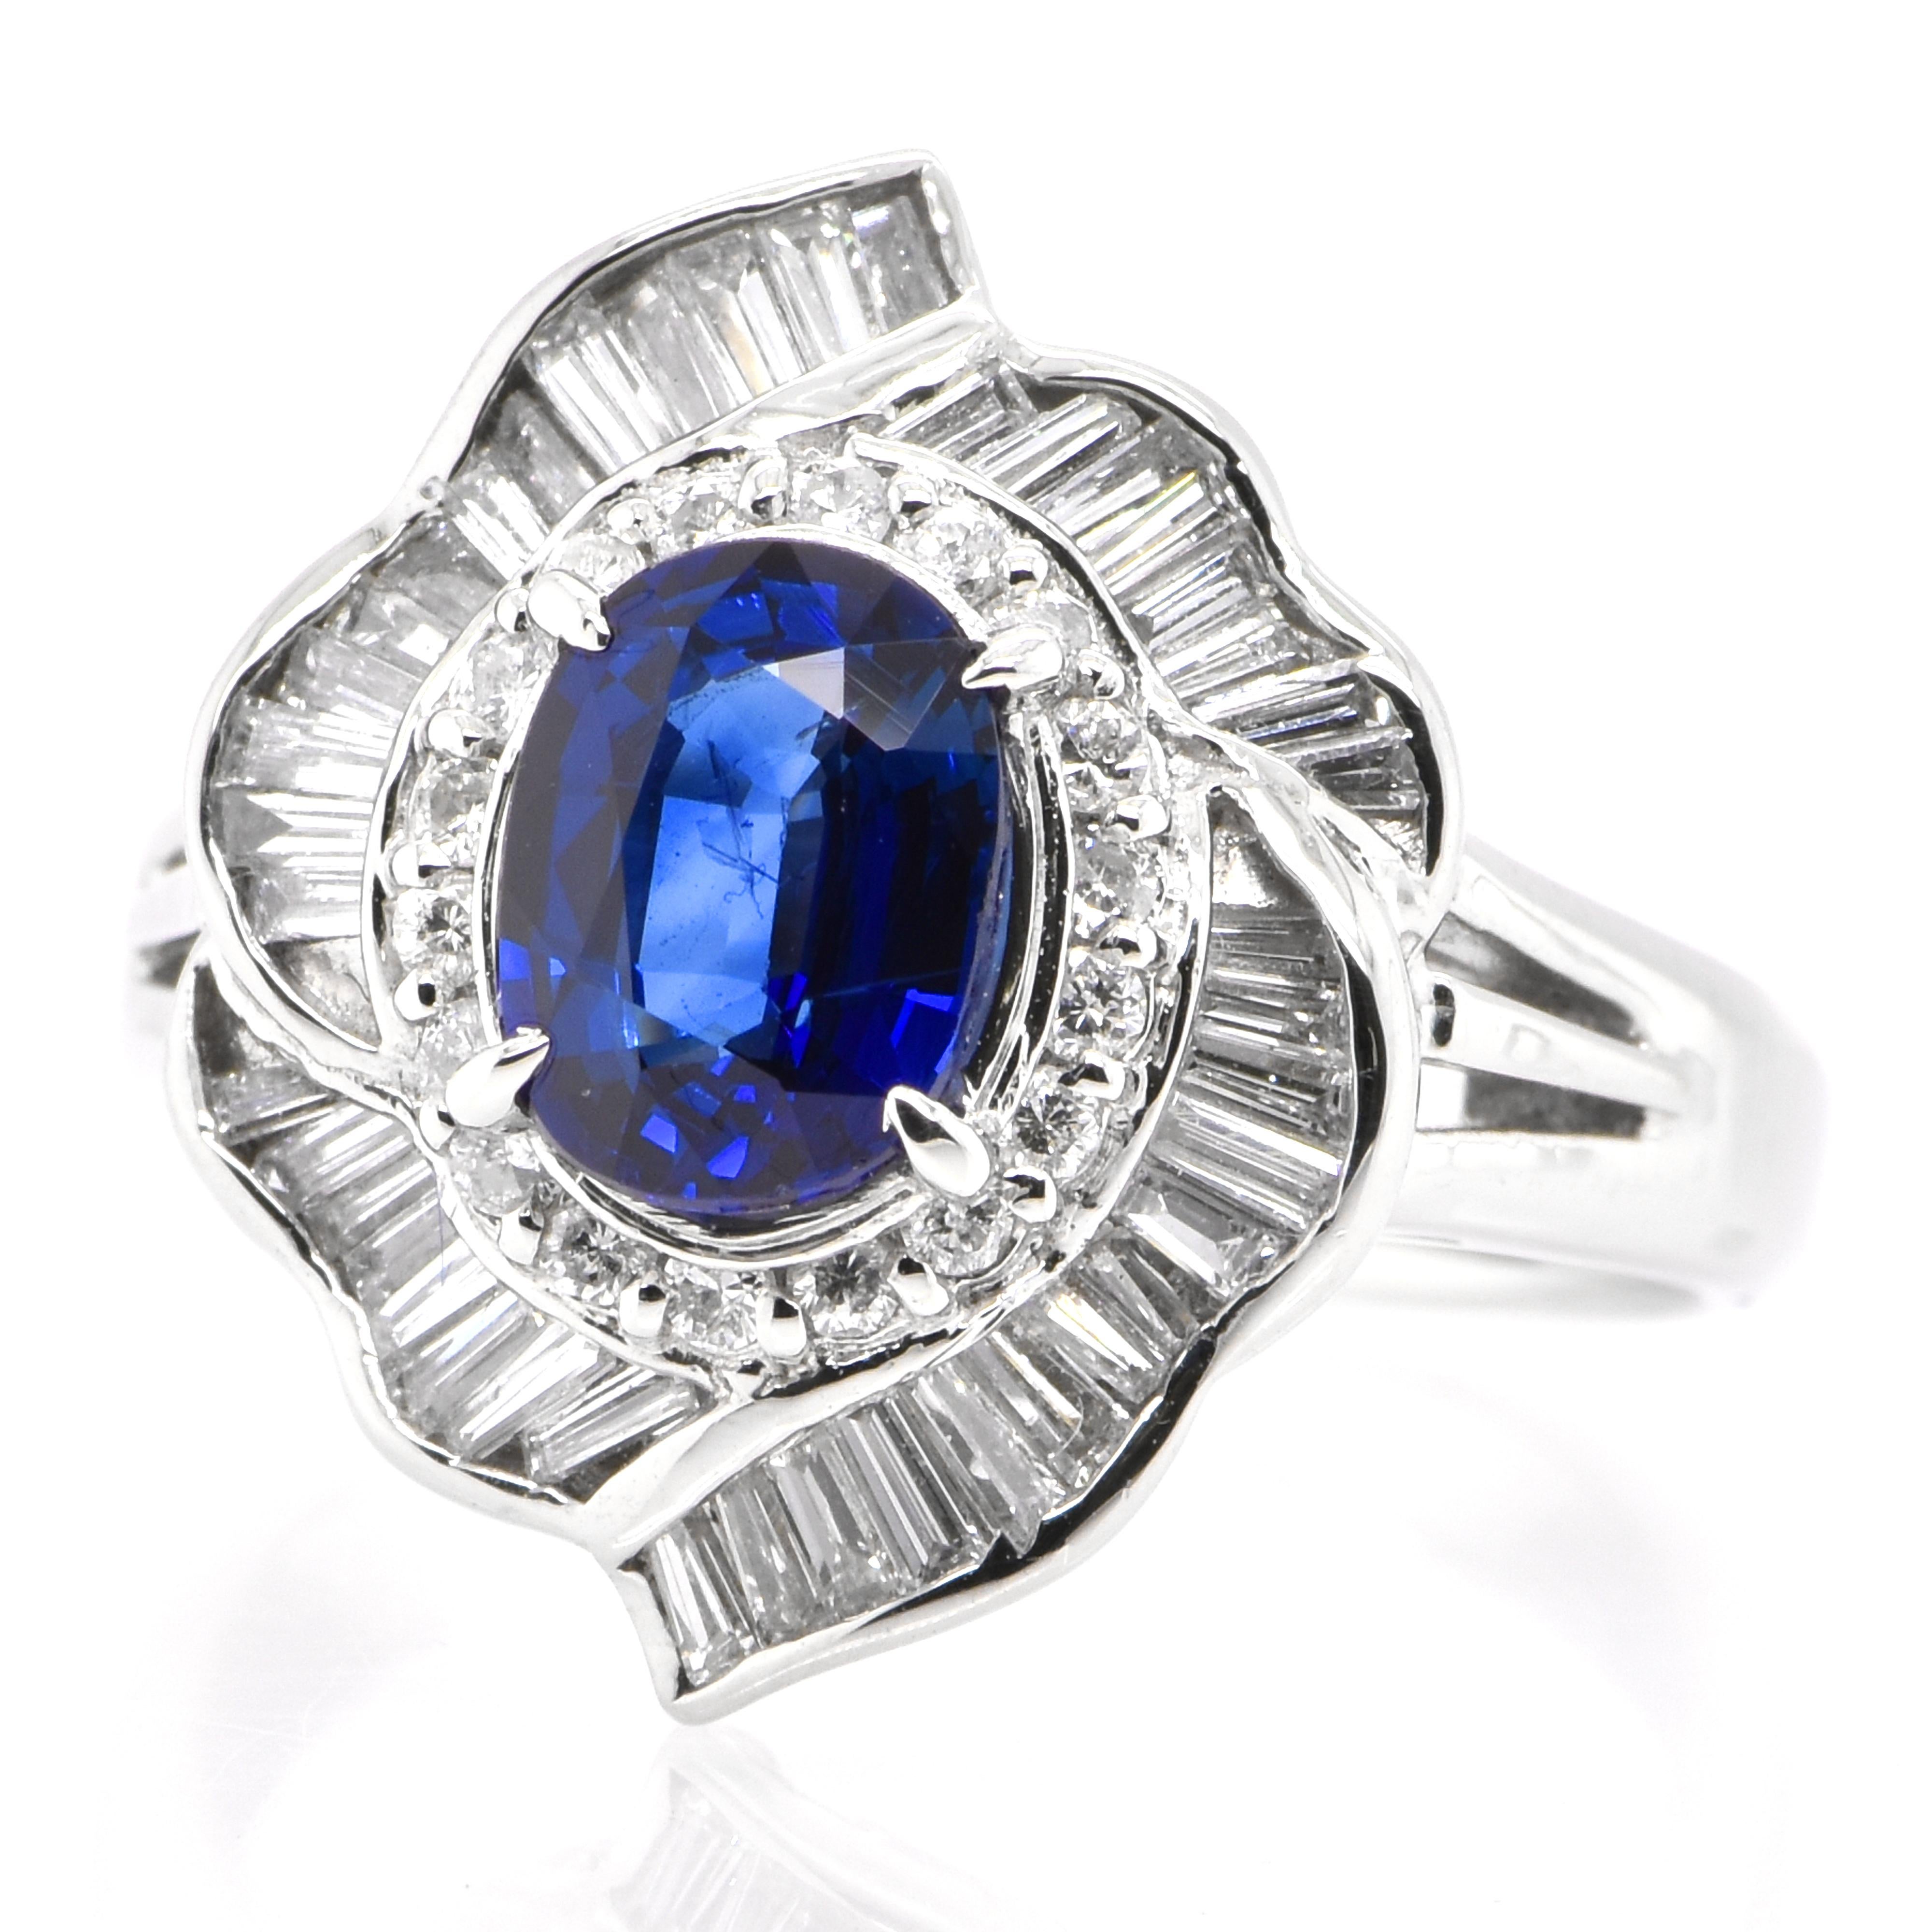 A beautiful ring featuring 1.28 Carat Natural Sapphire and 0.71 Carats Diamond Accents set in Platinum. Sapphires have extraordinary durability - they excel in hardness as well as toughness and durability making them very popular in jewelry.